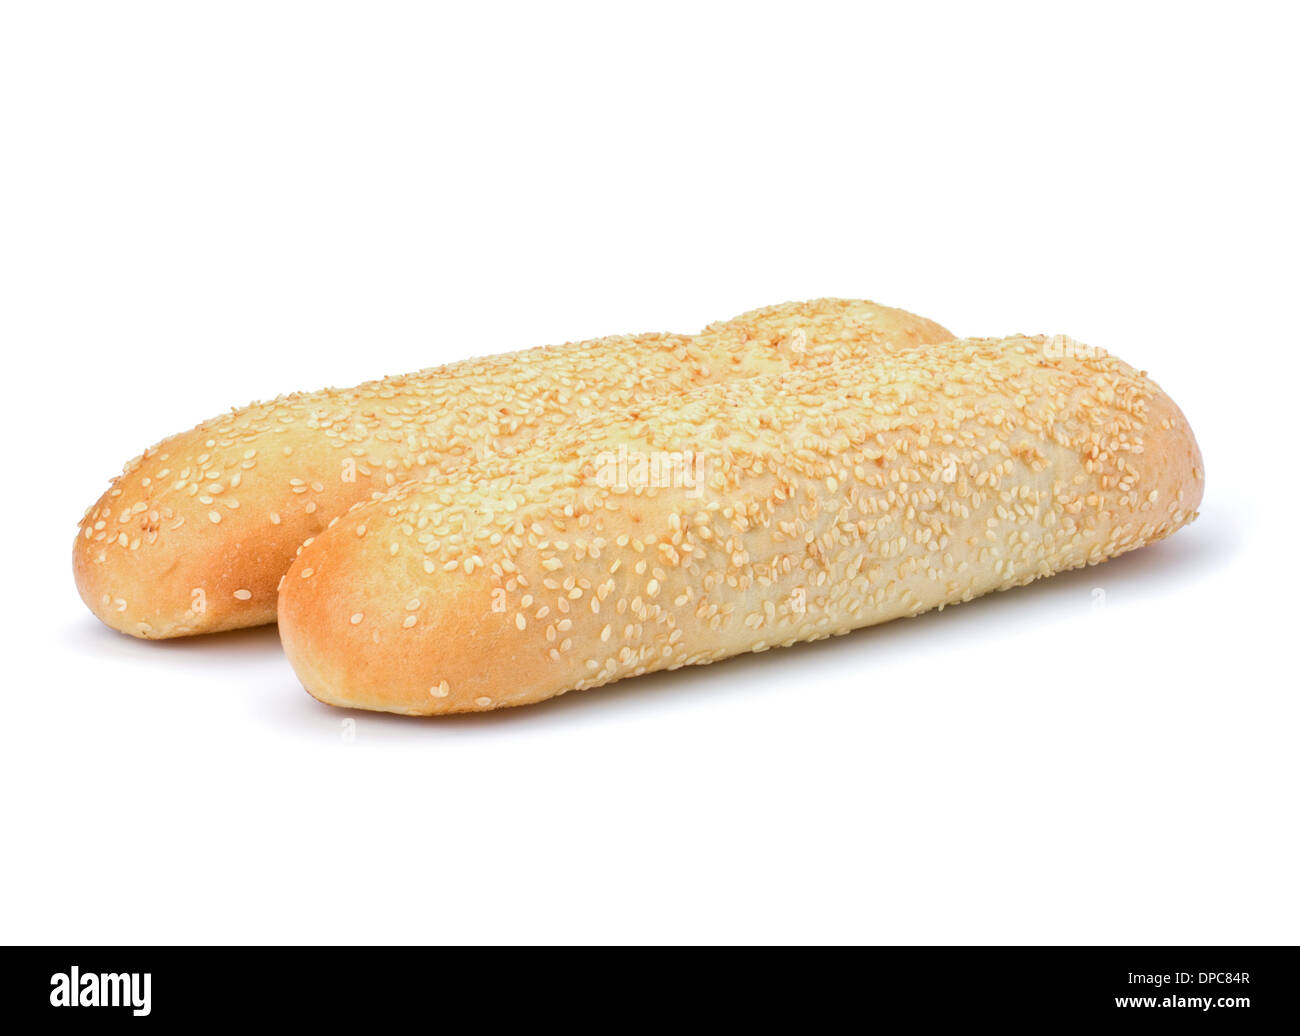 Healthy grain french baguette bread loaf isolated on white background Stock Photo